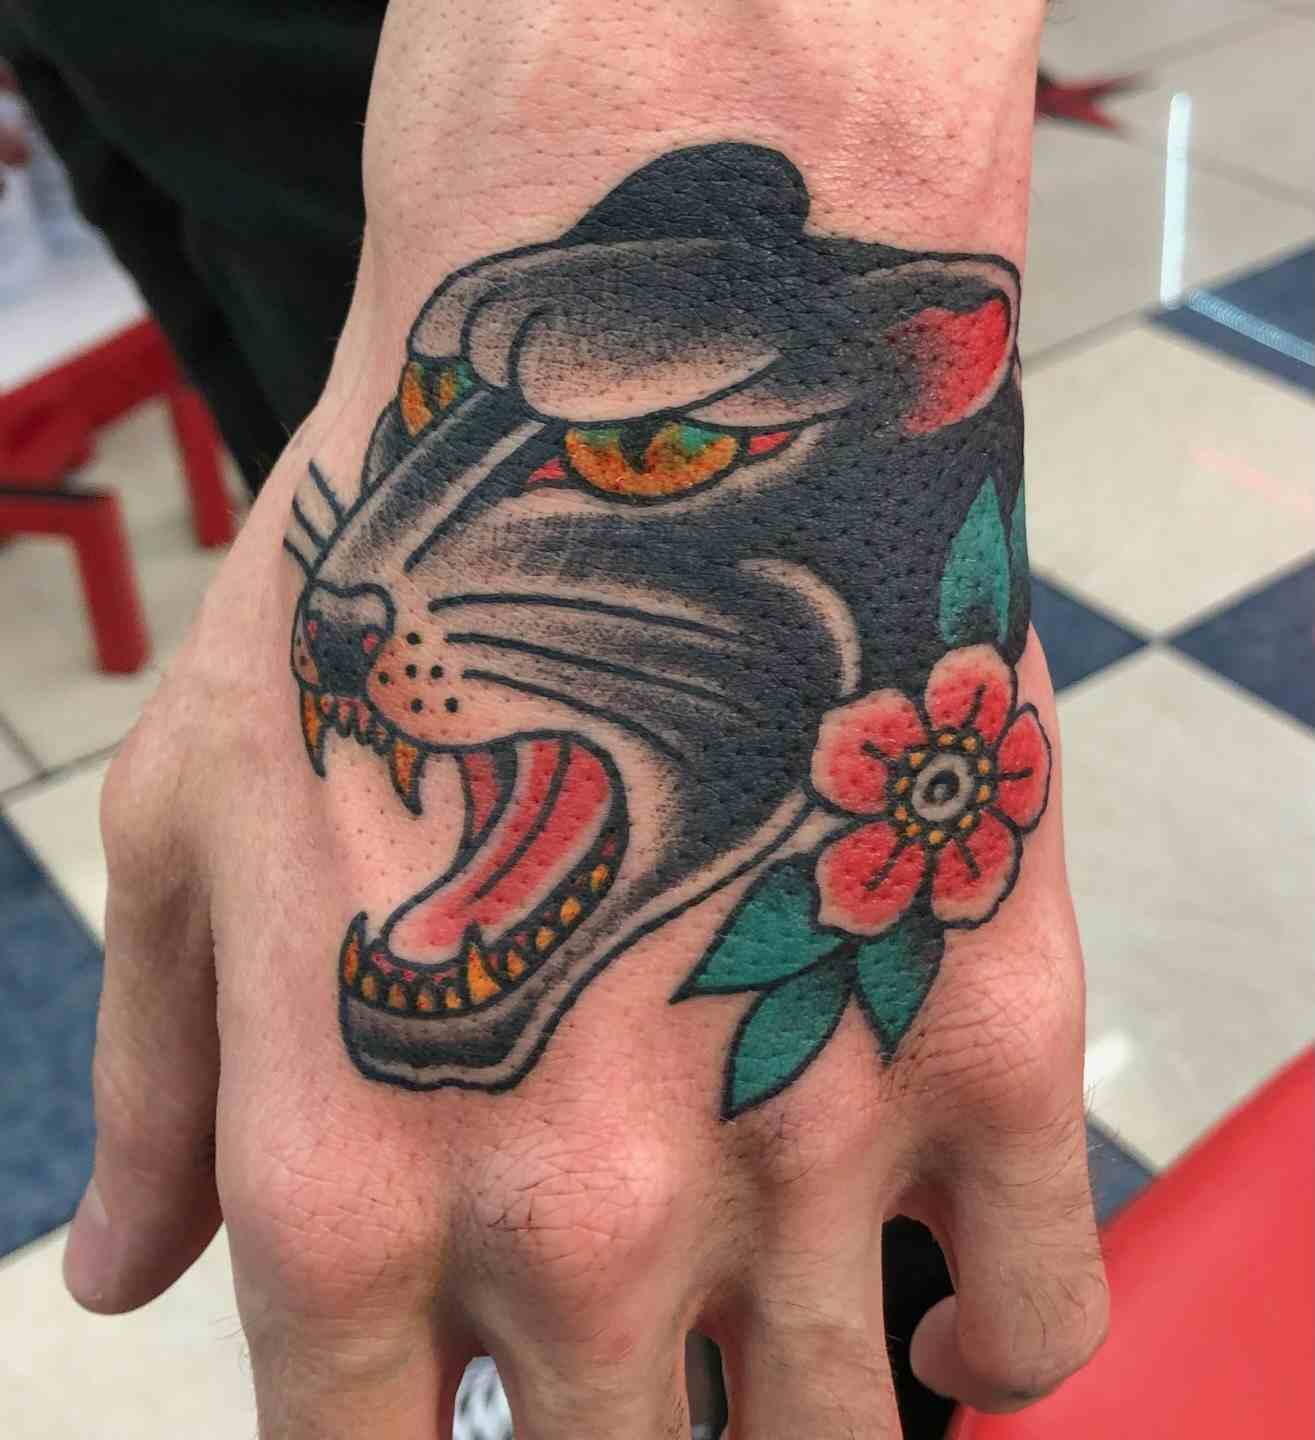 Panther hand tattoo